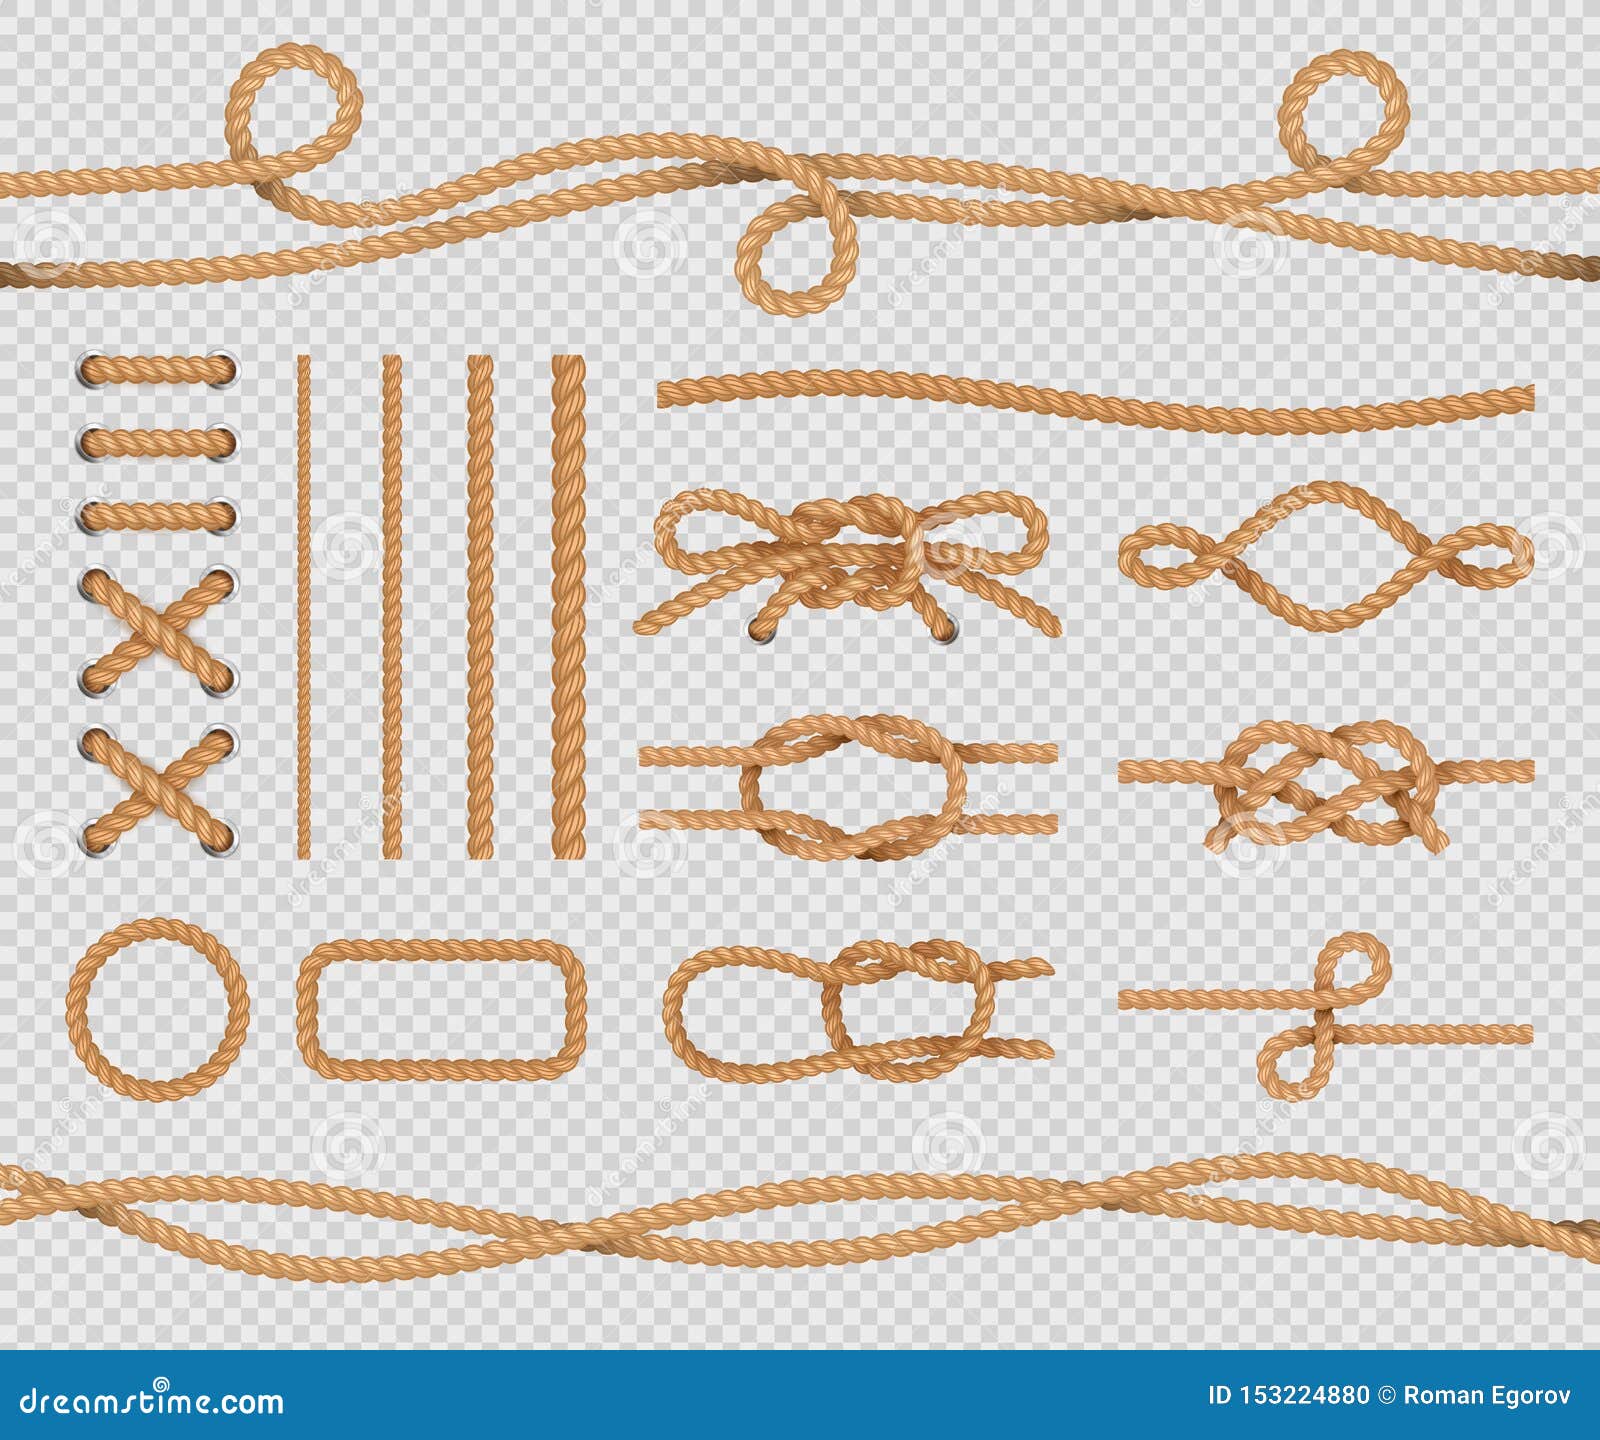 Ship Rope Elements. Realistic Marine Loops and Knots. Nautical